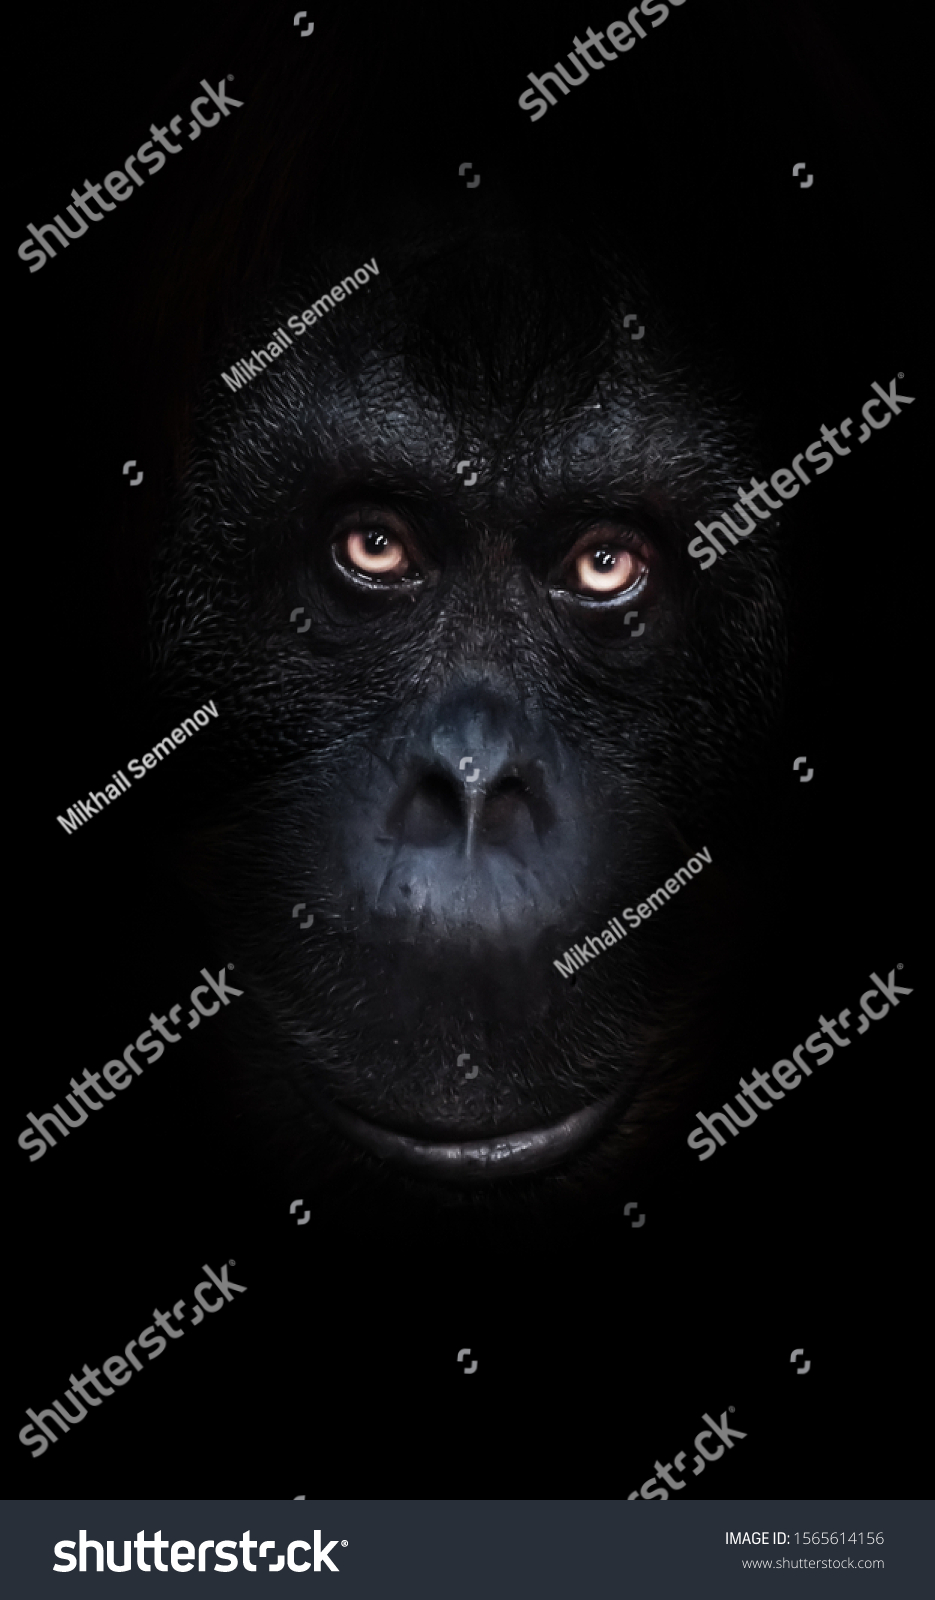 Scary orange luminous eyes on the black face of a monkey in a black night, a frightening look that embodies fears and phobias. #1565614156